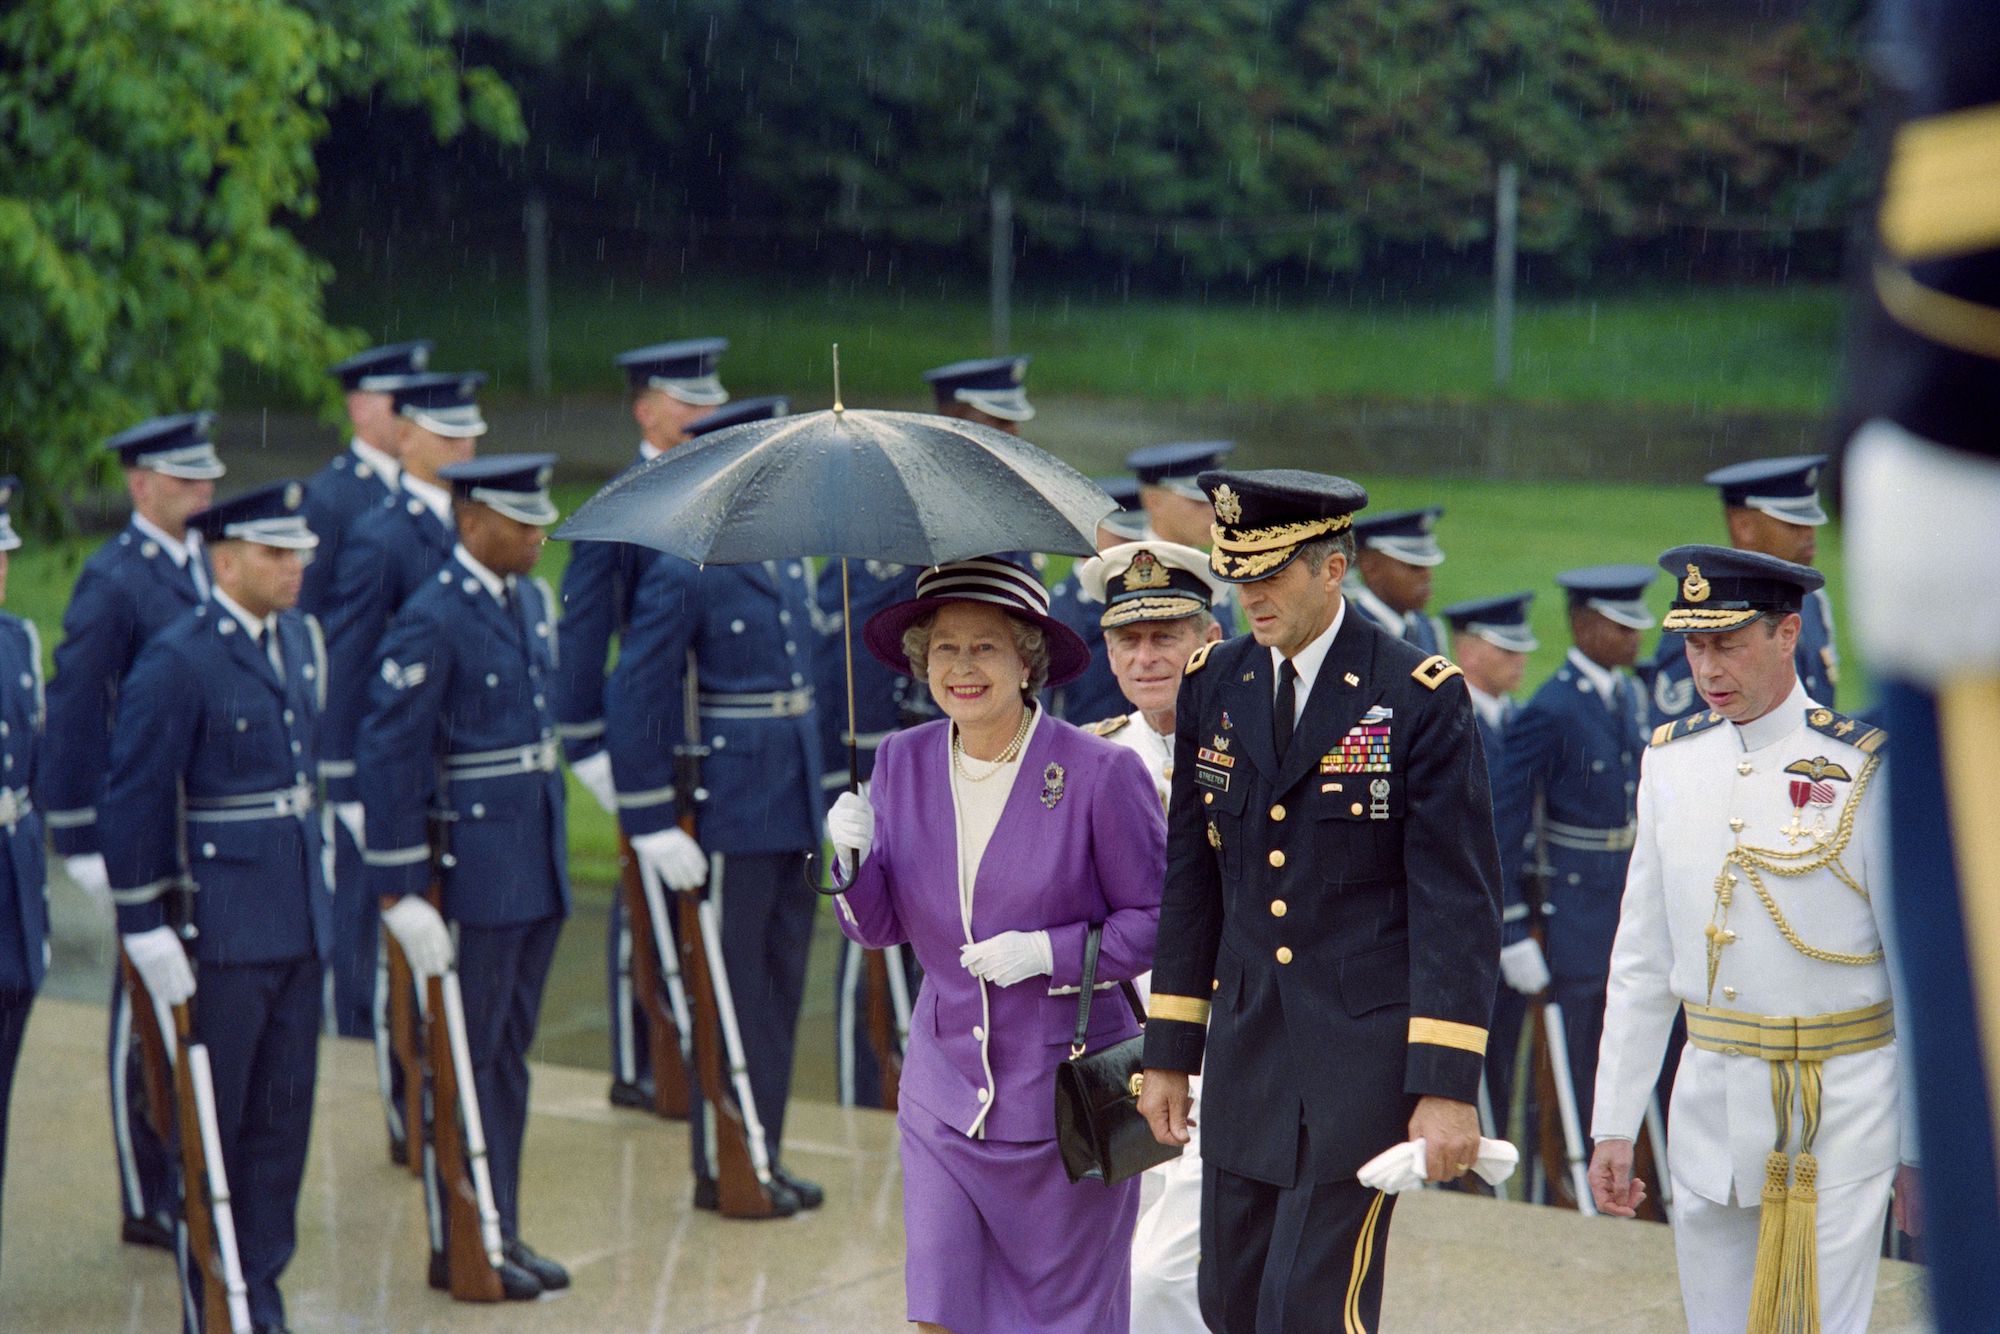 Queen Elizabeth II and Prince Philip visit the Tomb of the Unknowns in Arlington National Cemetery